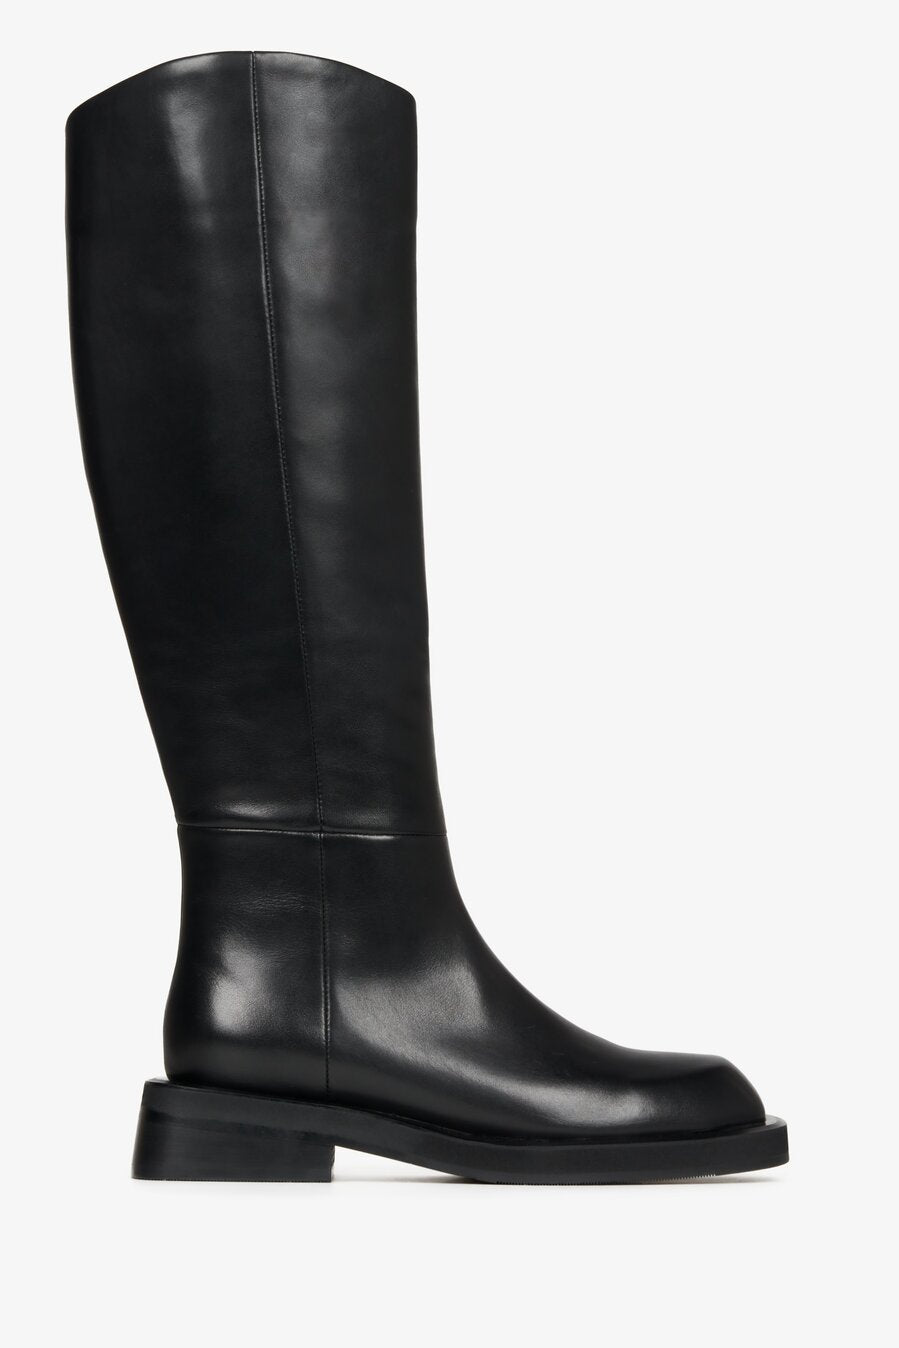 Women's Black High Boots made of Genuine Leather Estro ER00112104.